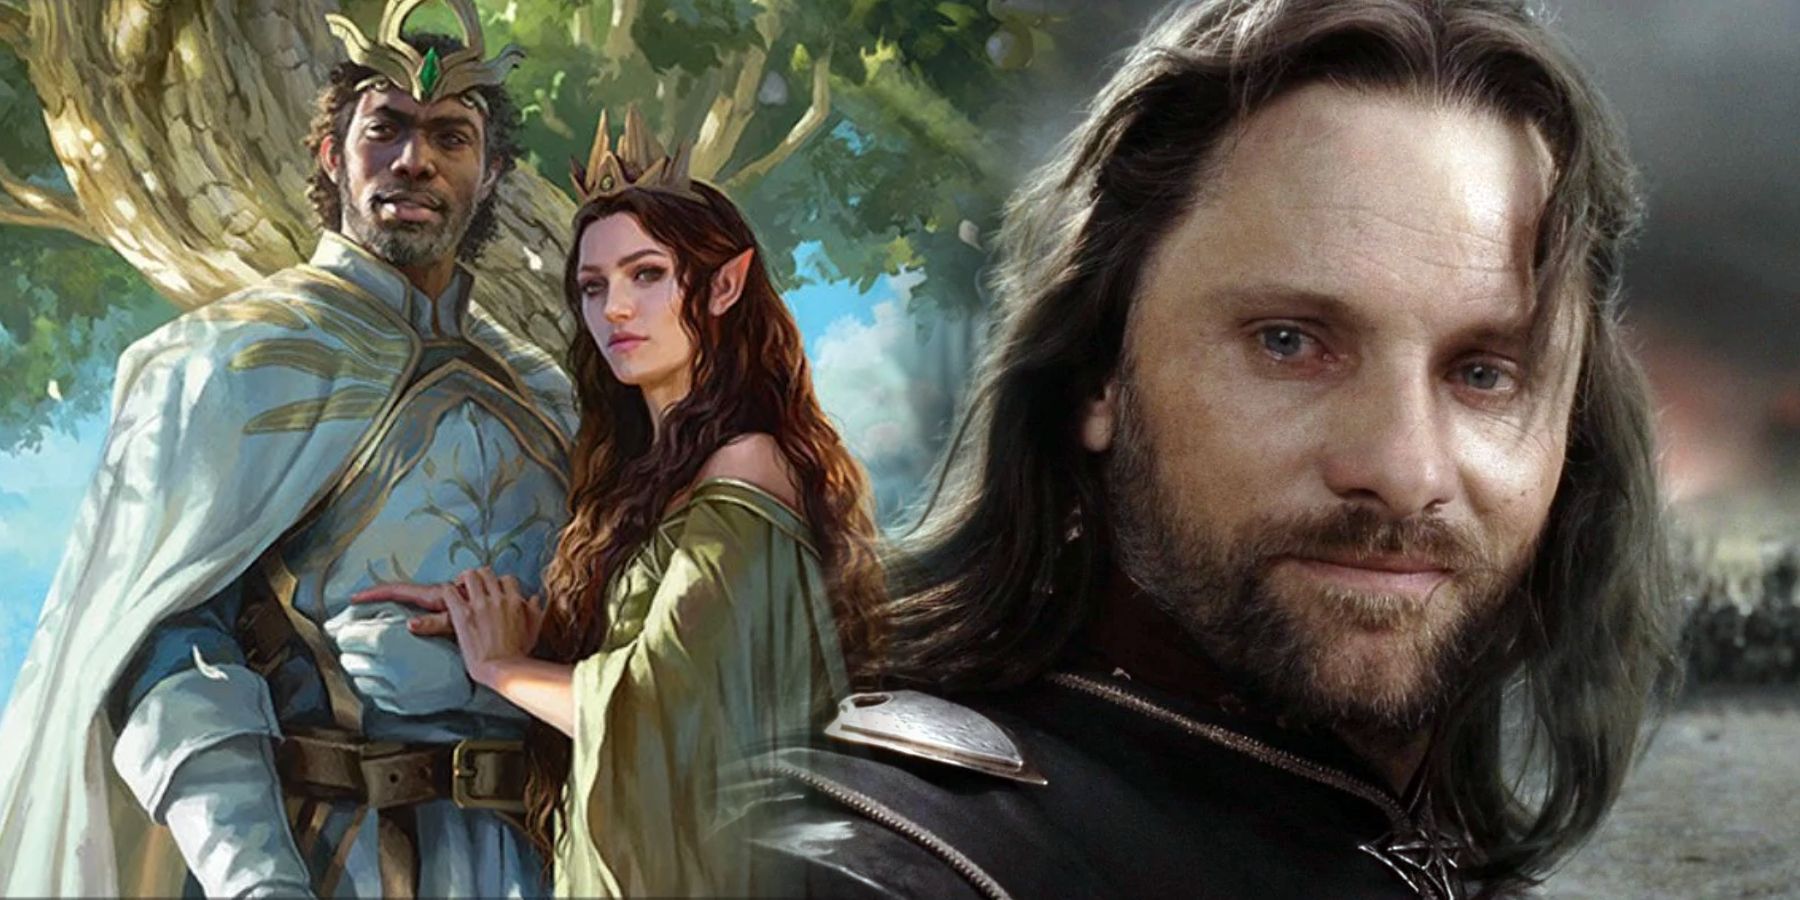 Fancast] Jamie Dornan as Aragorn for Amazon's Lord of the Rings. If you've  seen BBC's 'The Fall', you know he has the acting chops for it. If you  haven't, I highly recommend